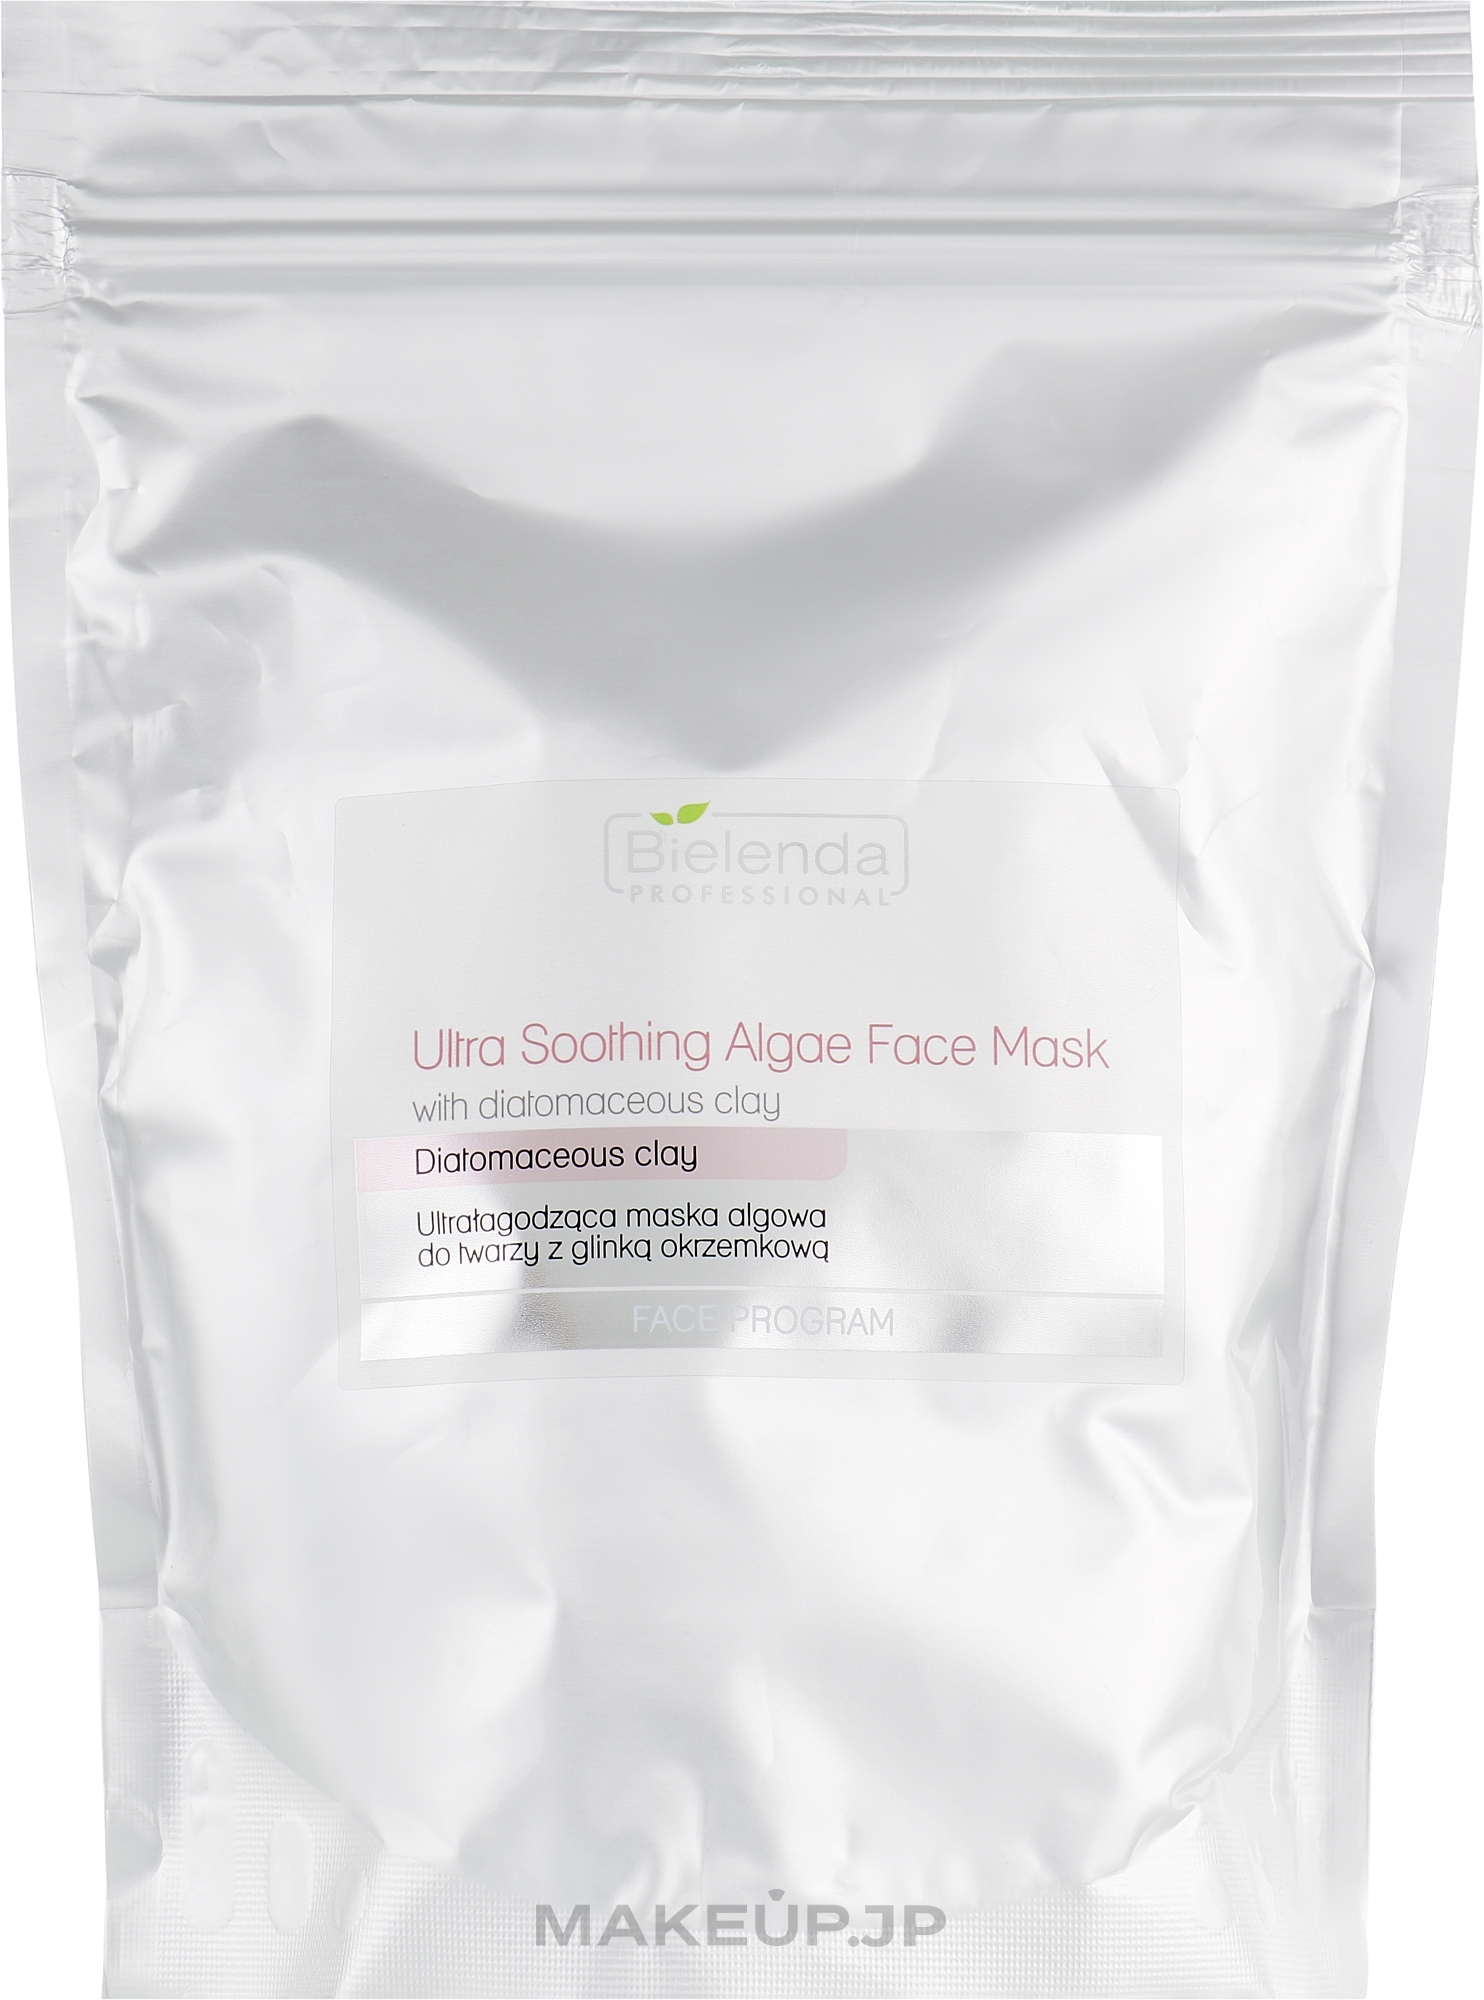 Ultra-Soothing Algae Face Mask with Diatomaceous Clay - Bielenda Professional Ultra Soothing Algae Fase Mask (refill) — photo 190 g